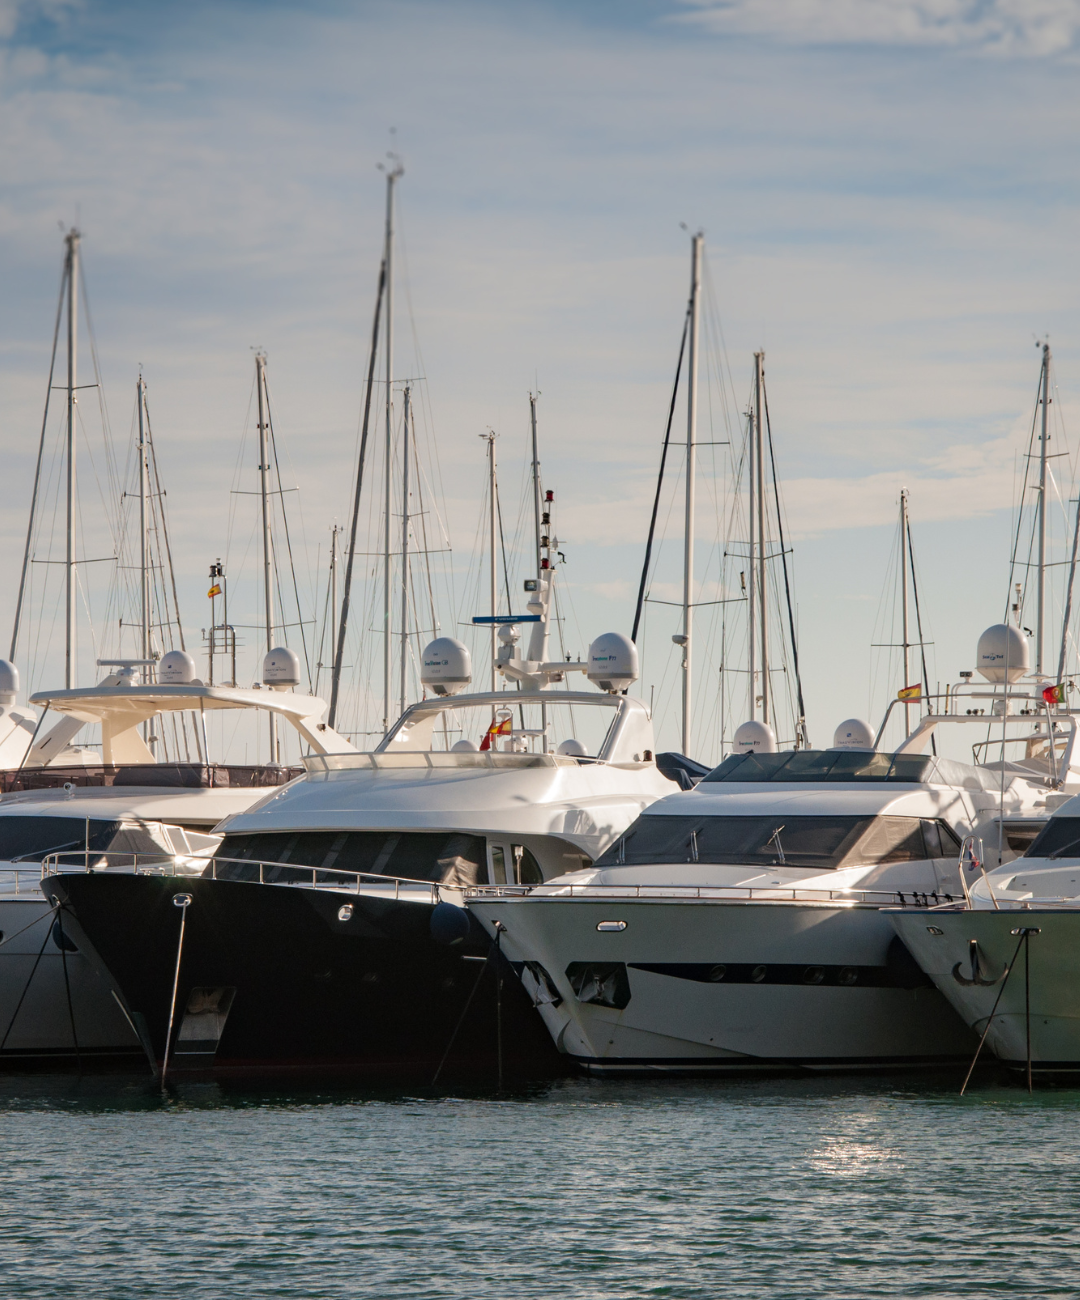 large yachts parked next to each other in a line